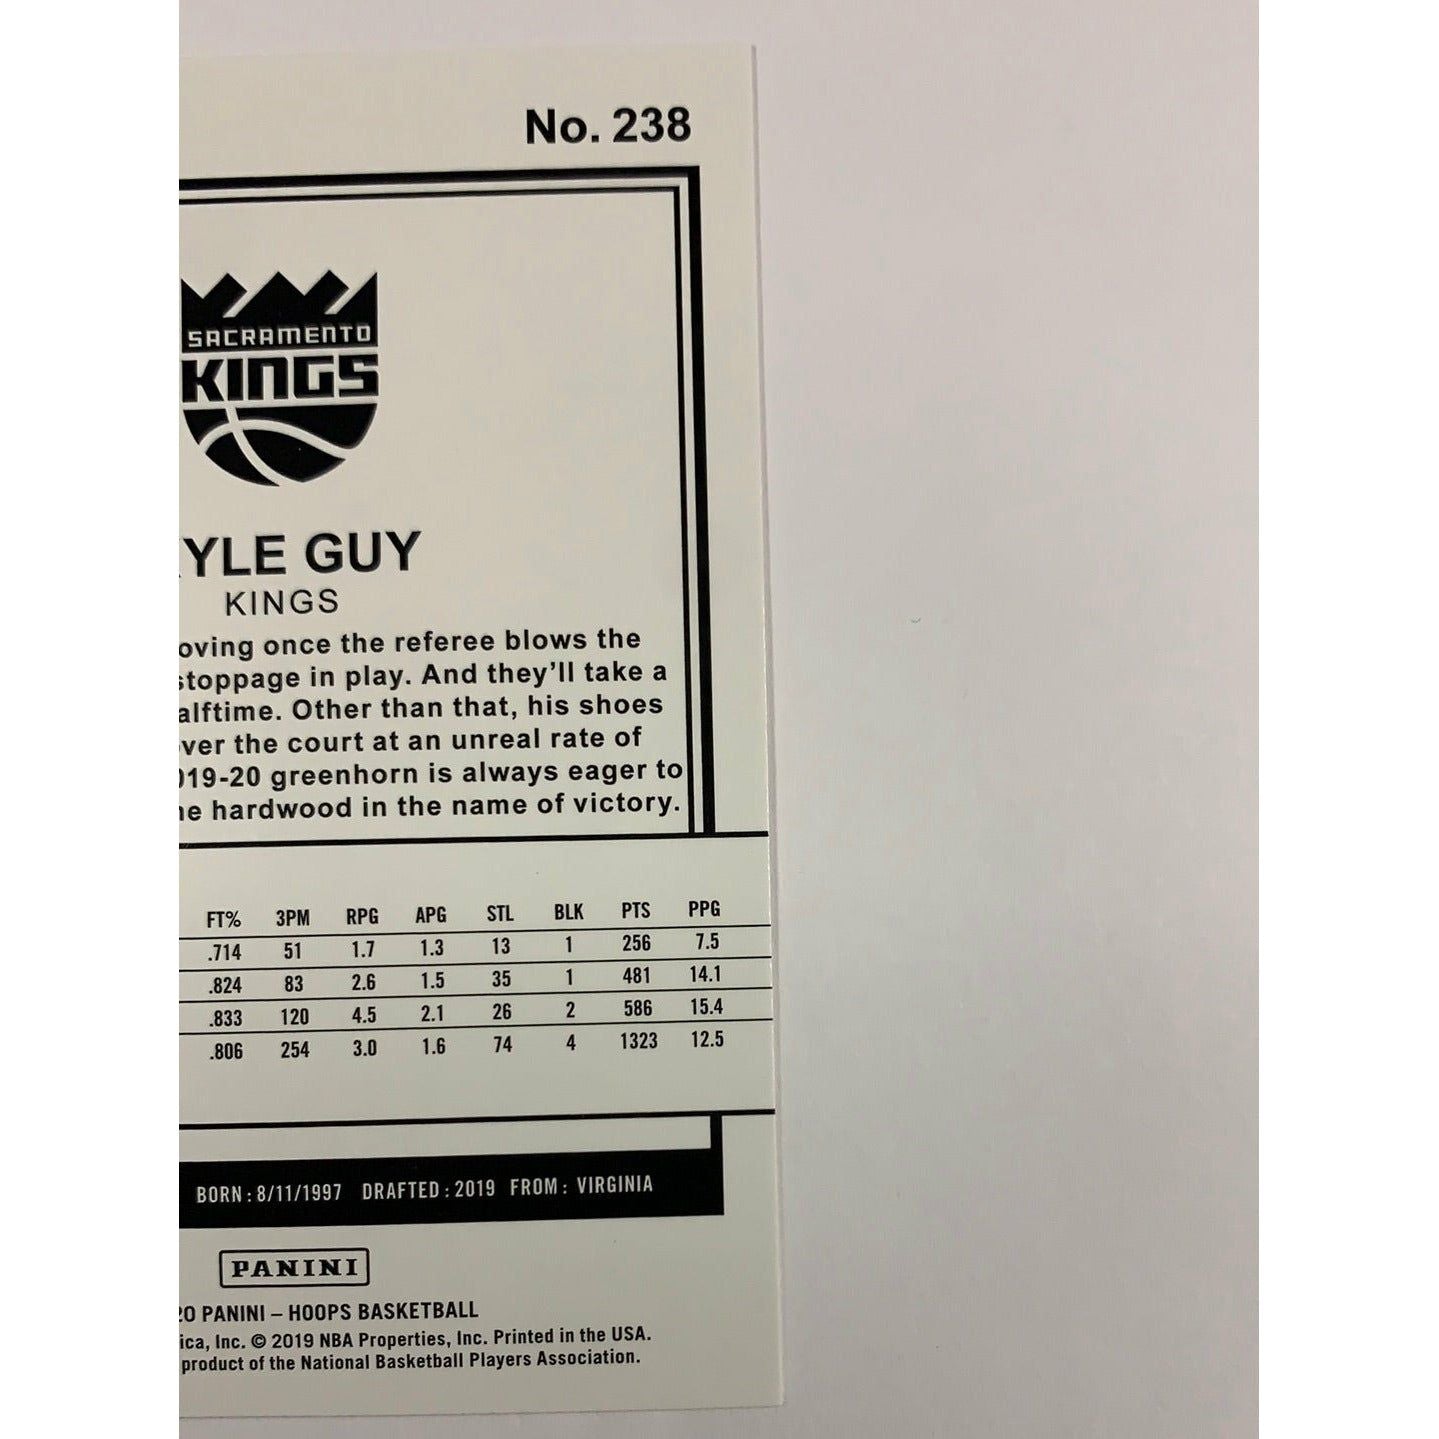  2019-20 Hoops Kyle Guy RC  Local Legends Cards & Collectibles